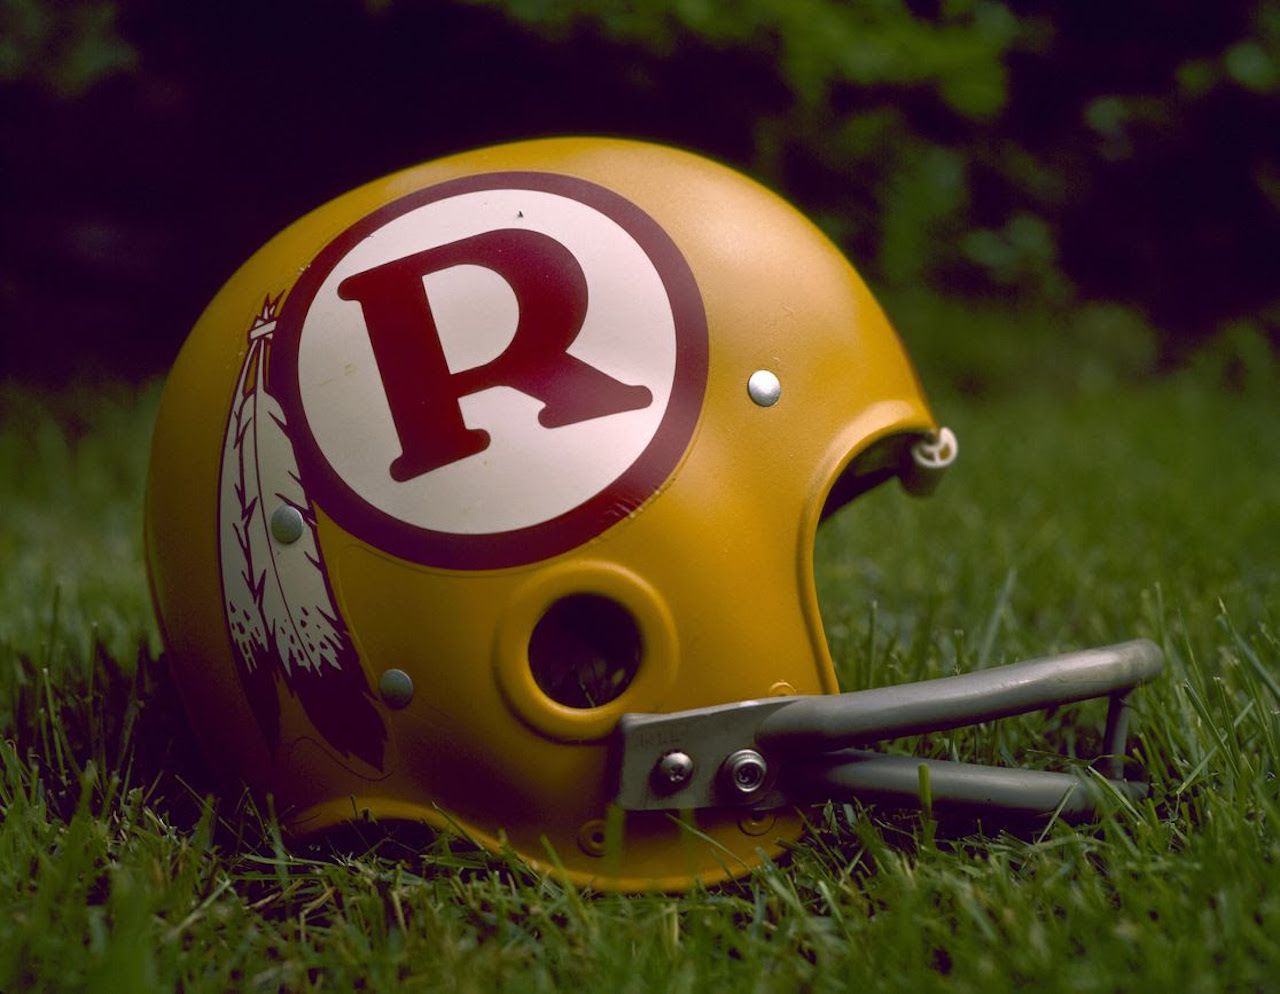 Redskins anticipated to replace name by September